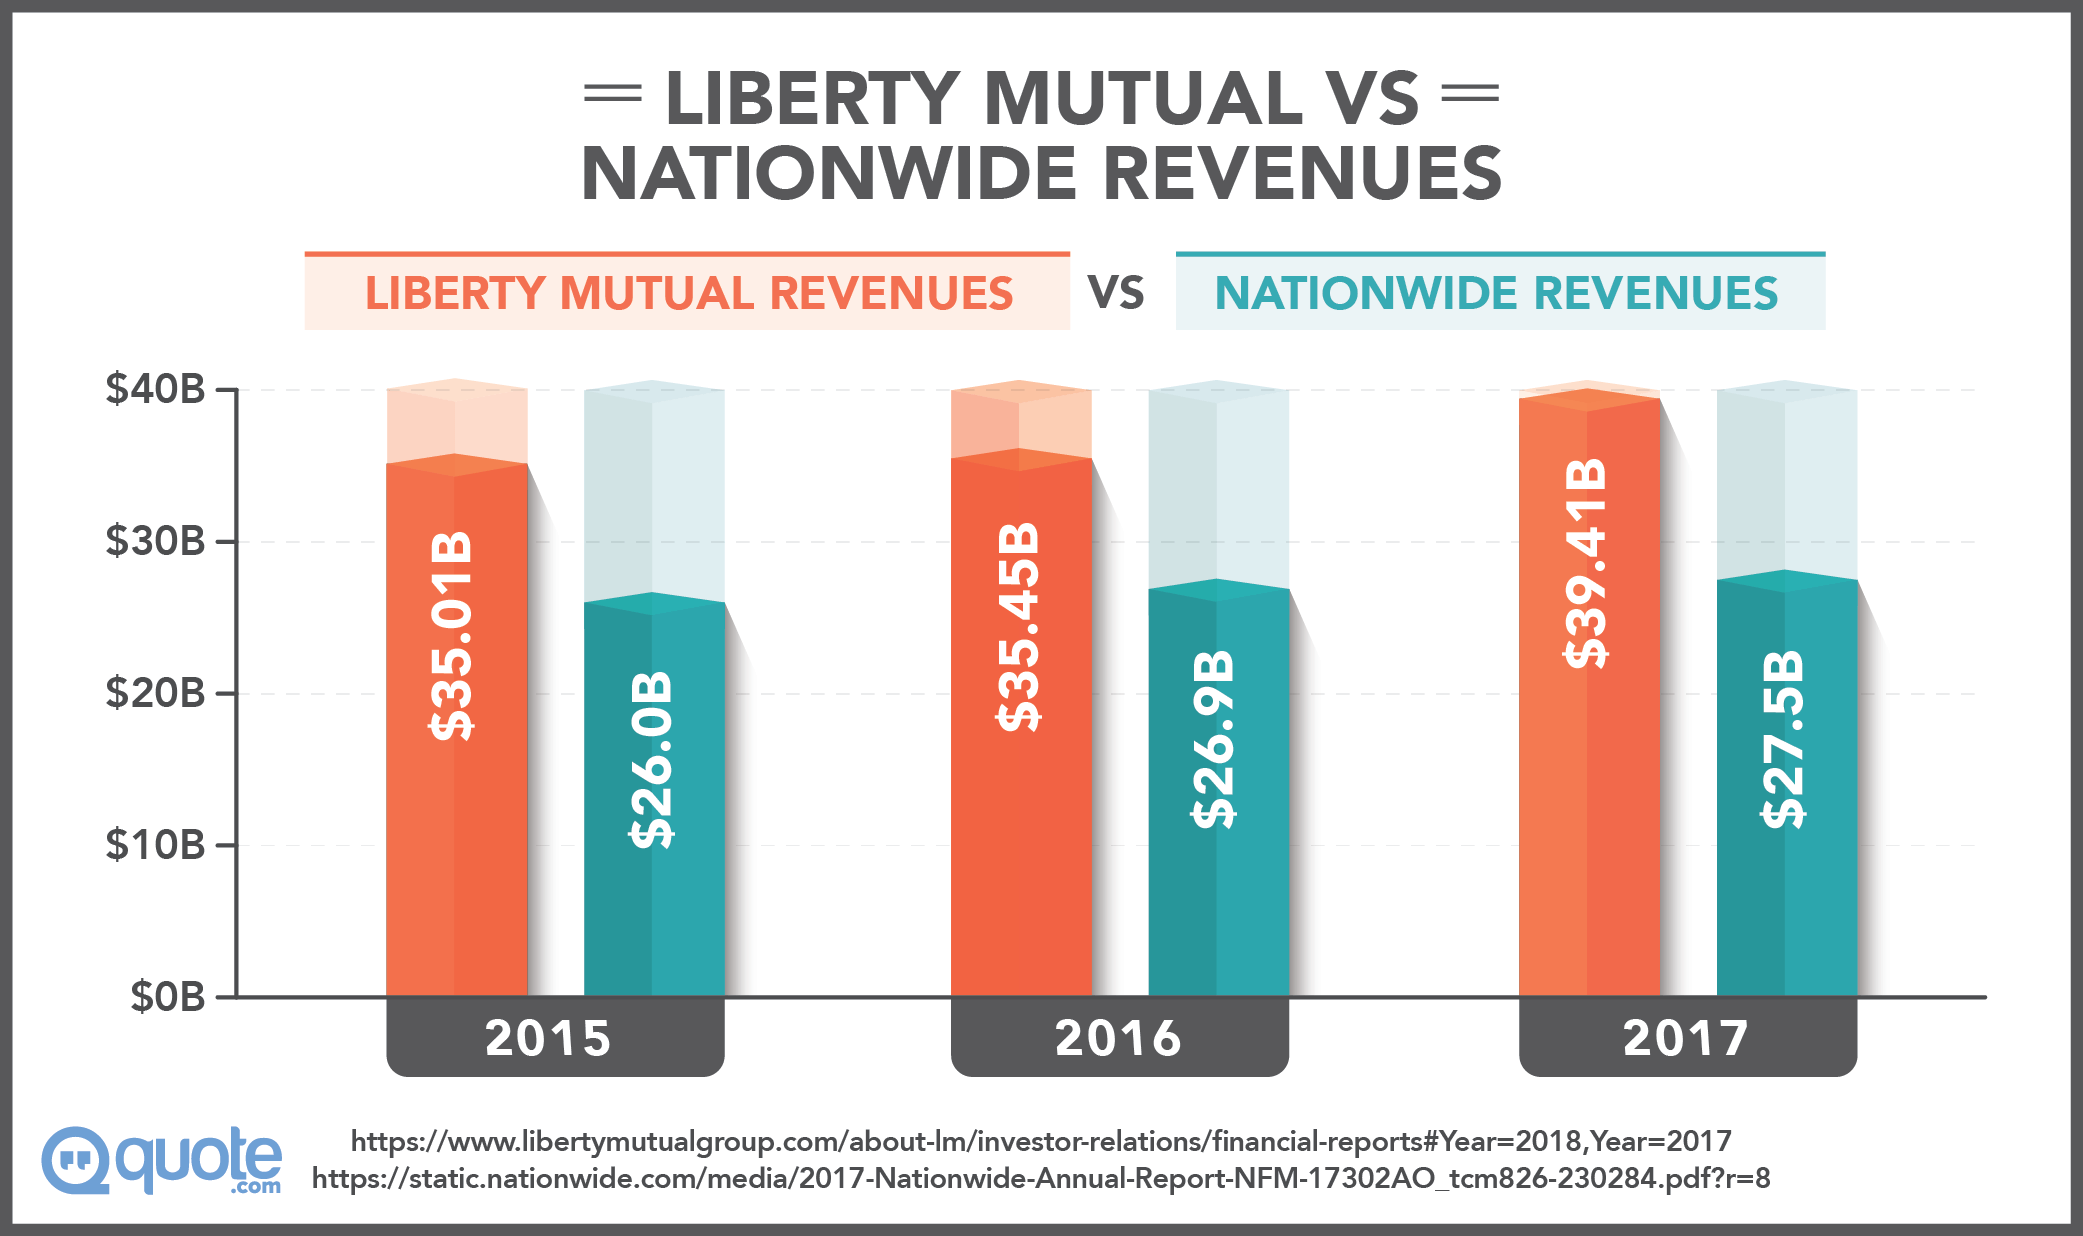 Liberty Mutual vs. Nationwide Revenues from 2015-2017